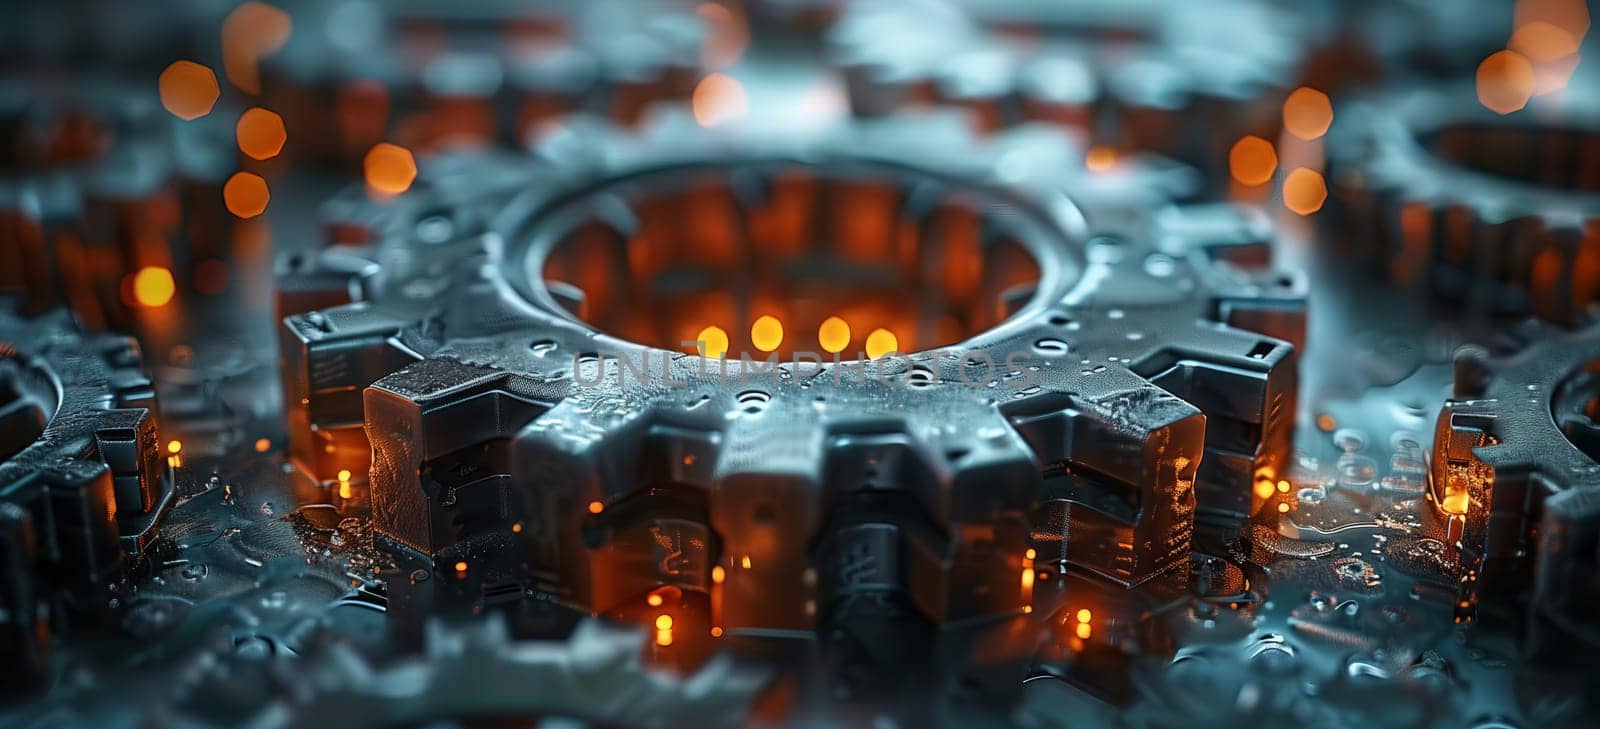 Closeup shot of a glowing gear surrounded by electric blue lights by richwolf